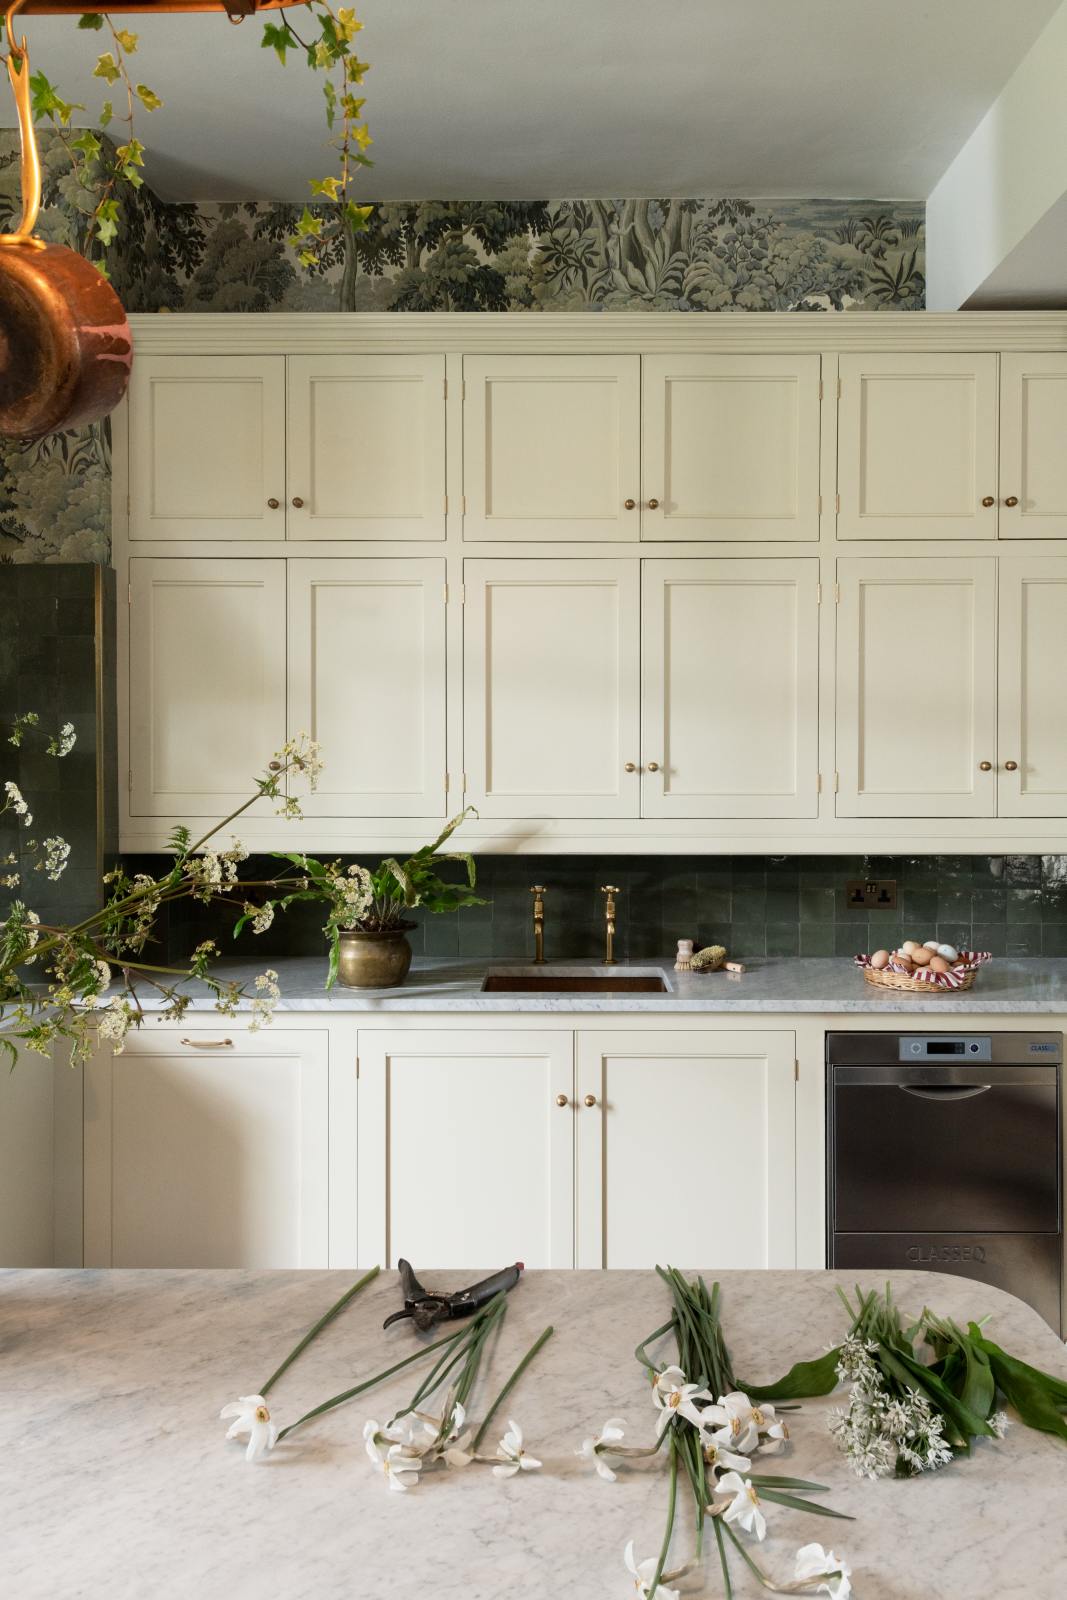 Pale green cabinets and deep moody green tile backsplash in the English country kitchen renovated with deVOL at Castle Trematon with House of Hackney wall covering and design. #devolkitchens #castletrematon